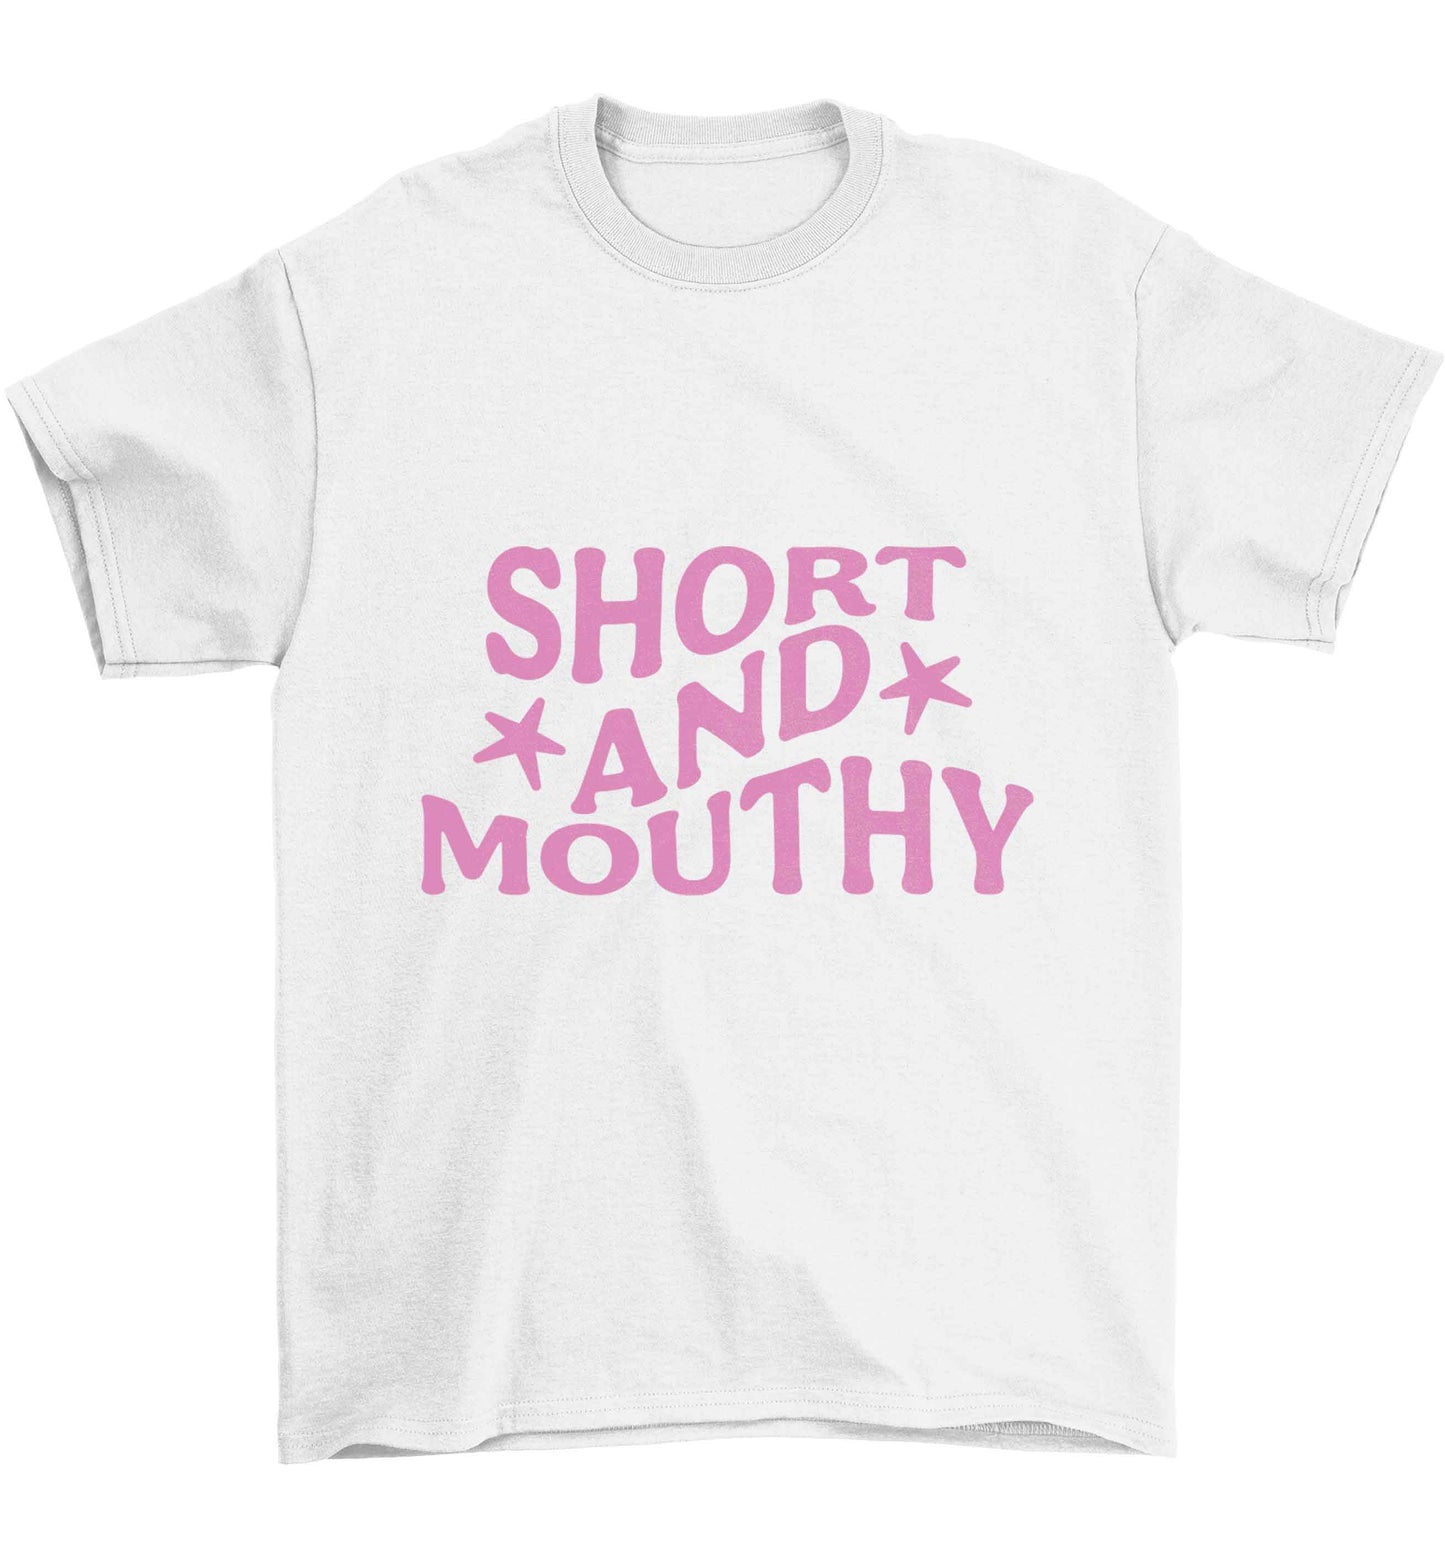 Short and mouthy Children's white Tshirt 12-13 Years